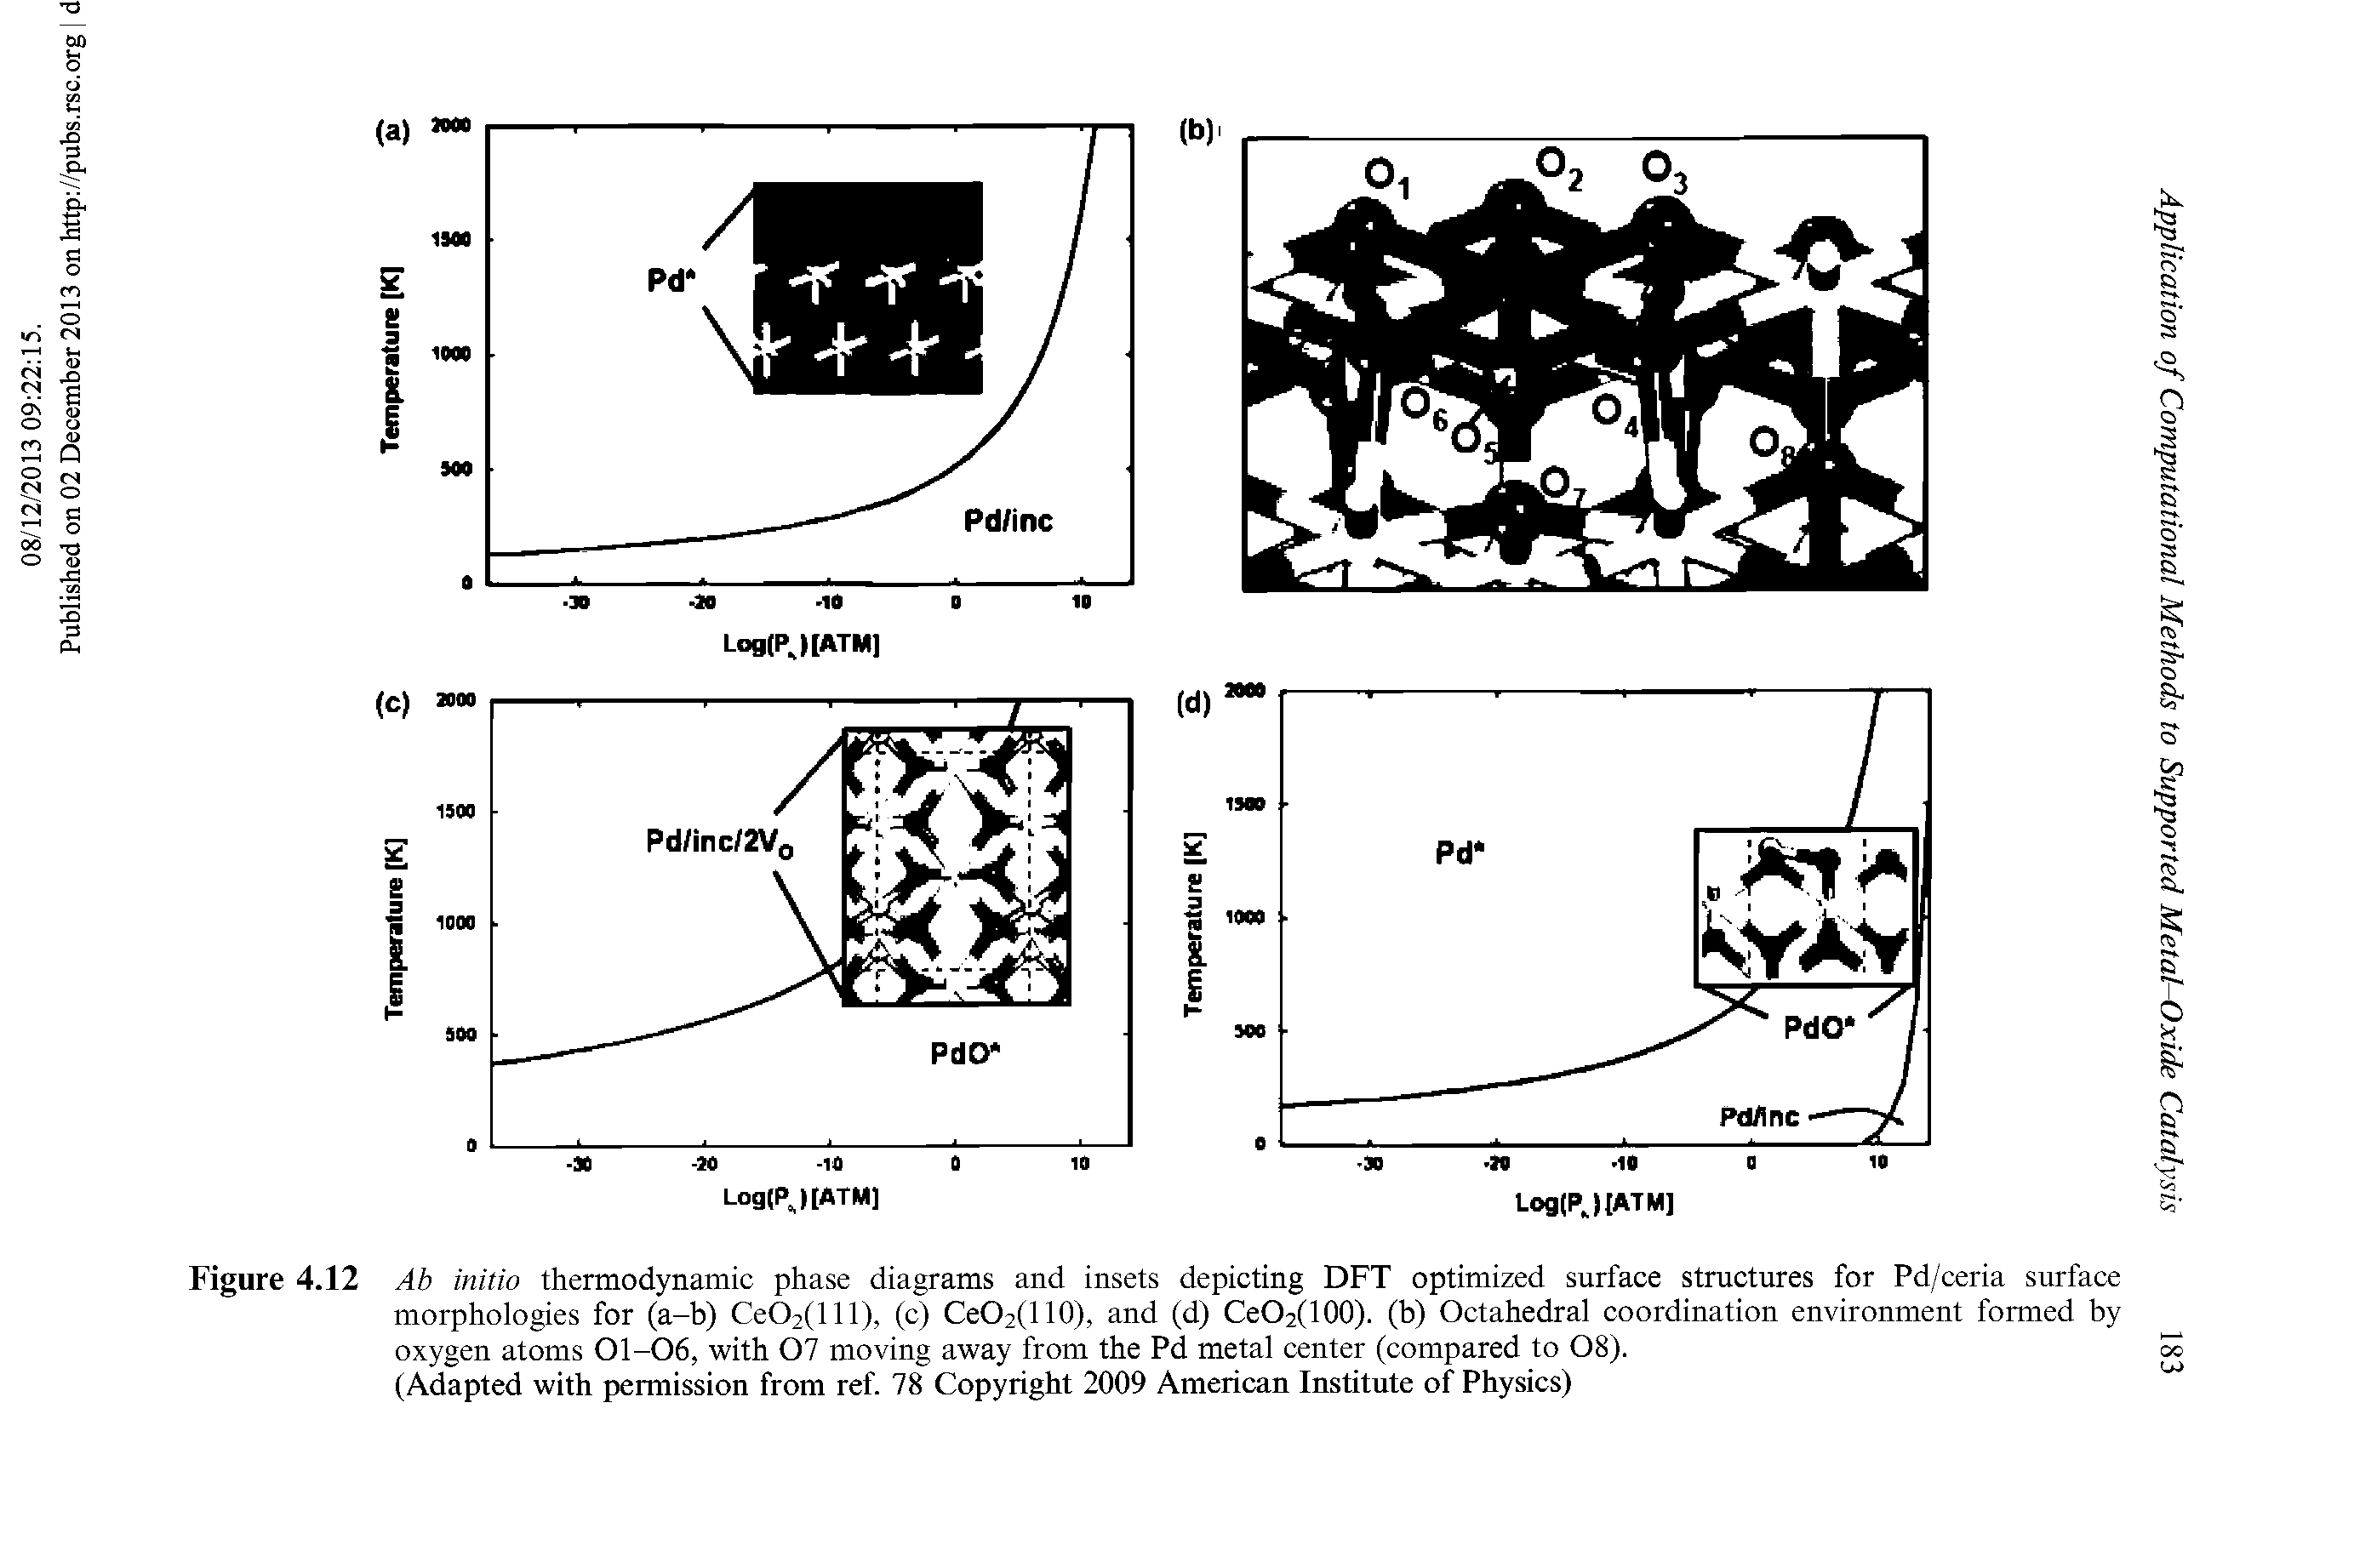 Figure 4.12 Ab initio thermodynamic phase diagrams and insets depicting DFT optimized surface structures for Pd/ceria surface morphologies for (a-b) Ce02(lll), (c) CeO2(110), and (d) CeO2(100). (b) Octahedral coordination environment formed by oxygen atoms 01-06, with 07 moving away from the Pd metal center (compared to 08).